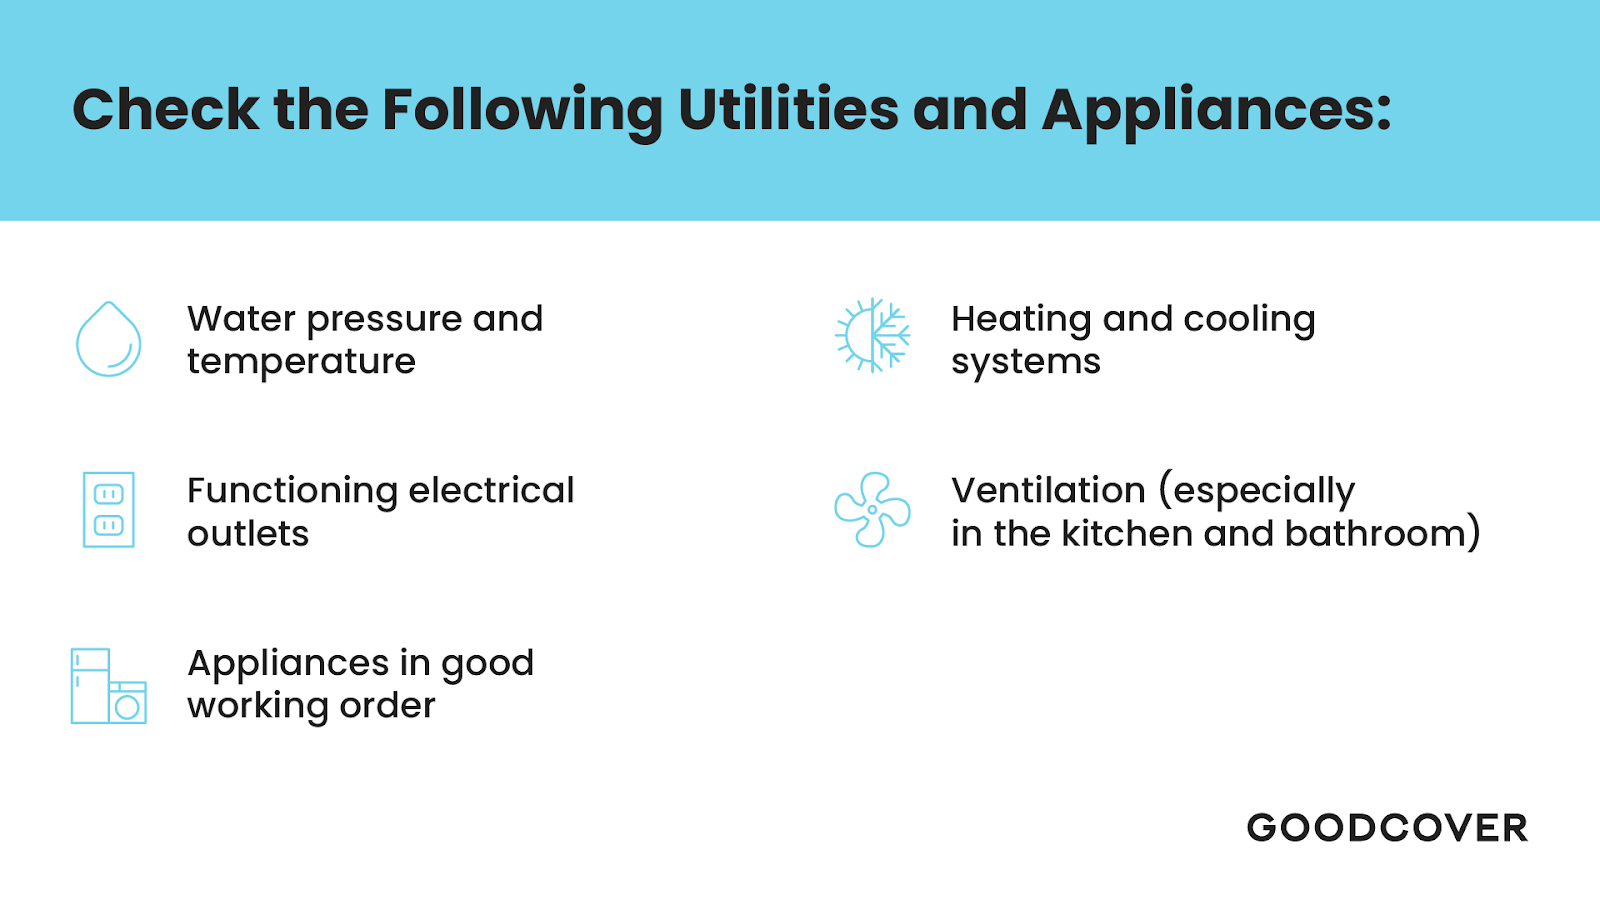 Make sure your rental utilities and appliances work properly.